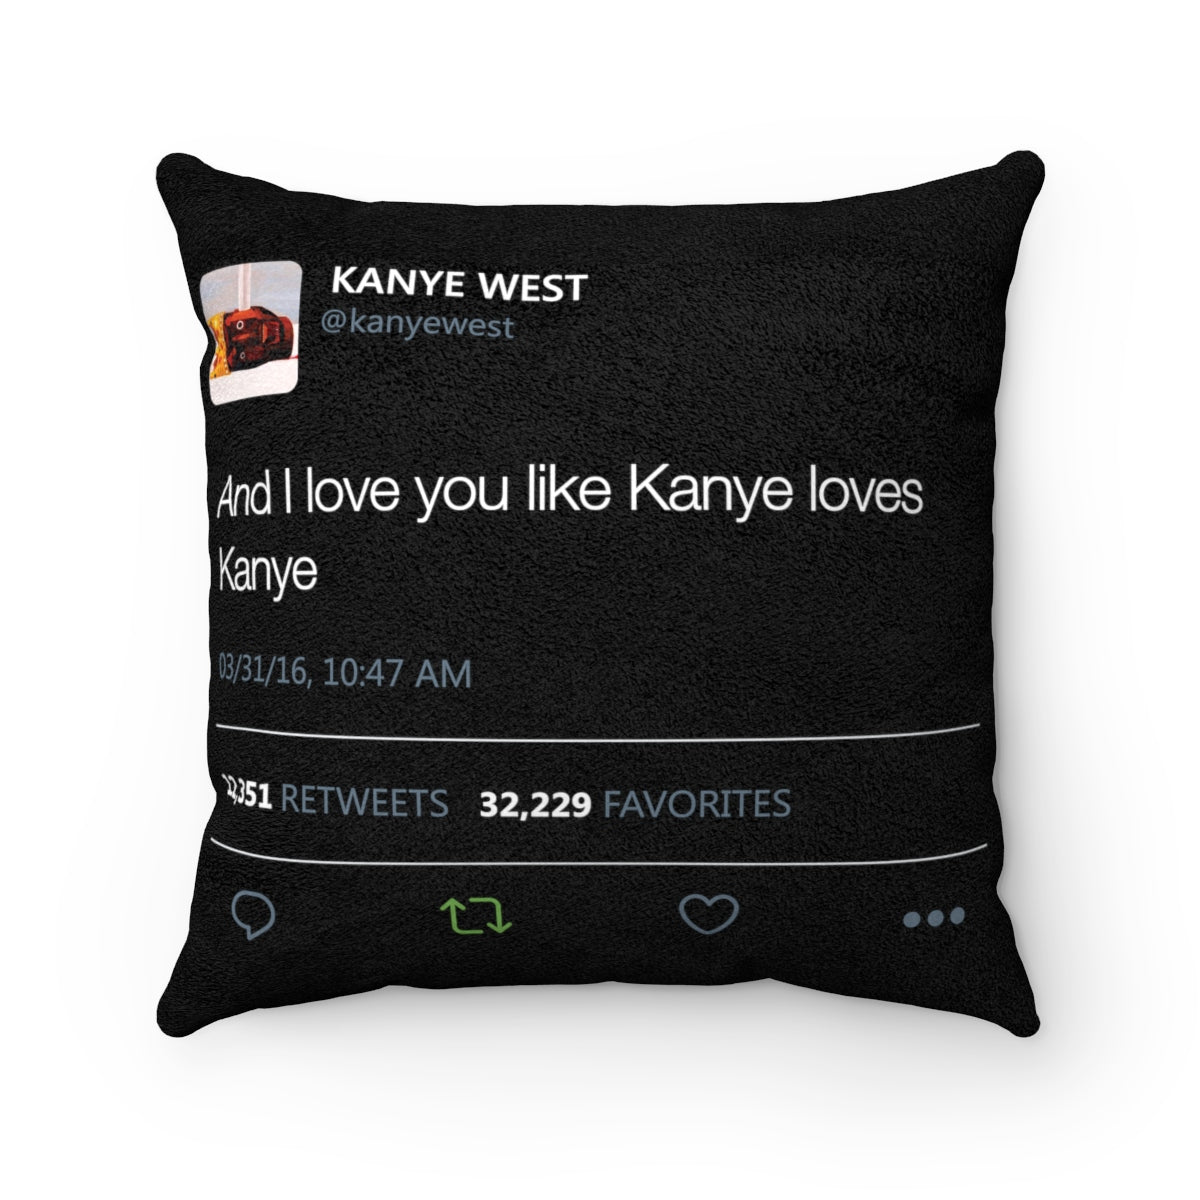 Cover only - And I love you like Kanye loves Kanye - Kanye West Tweet Quote Faux Suede Square Pillow Case-14x14-Archethype